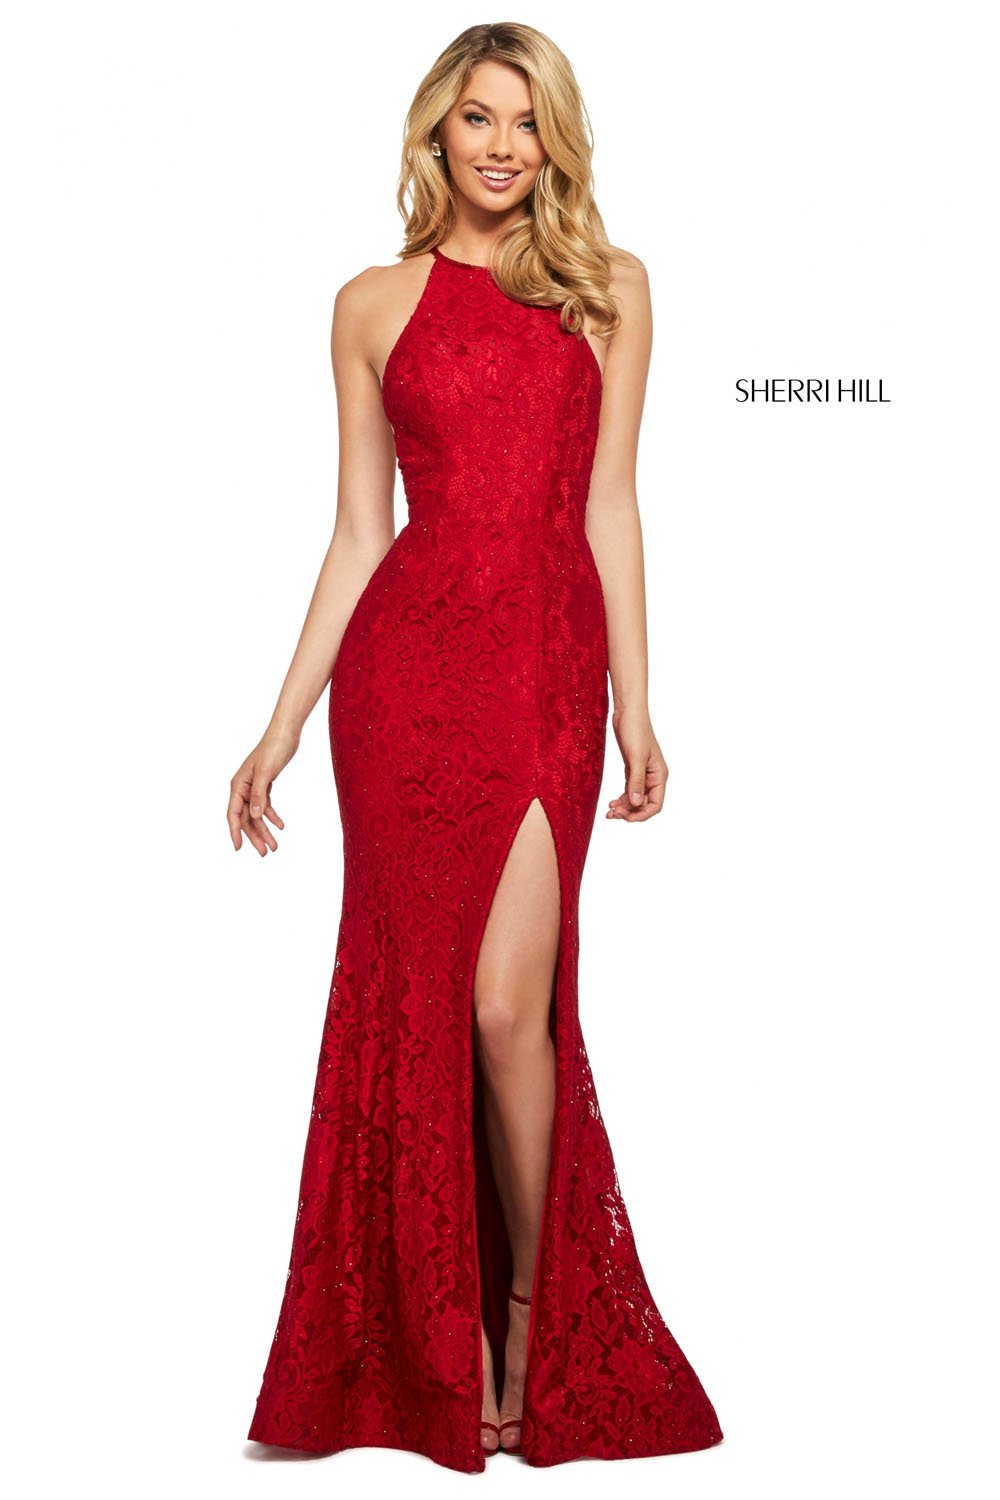 Sherri Hill 53361 dress images in these colors: Red, Ivory, Black, Royal, Peacock, Yellow, Blush, Coral, Navy, Light Yellow, Teal, Pink, Jade, Aqua, Dark Red, Bright Pink.